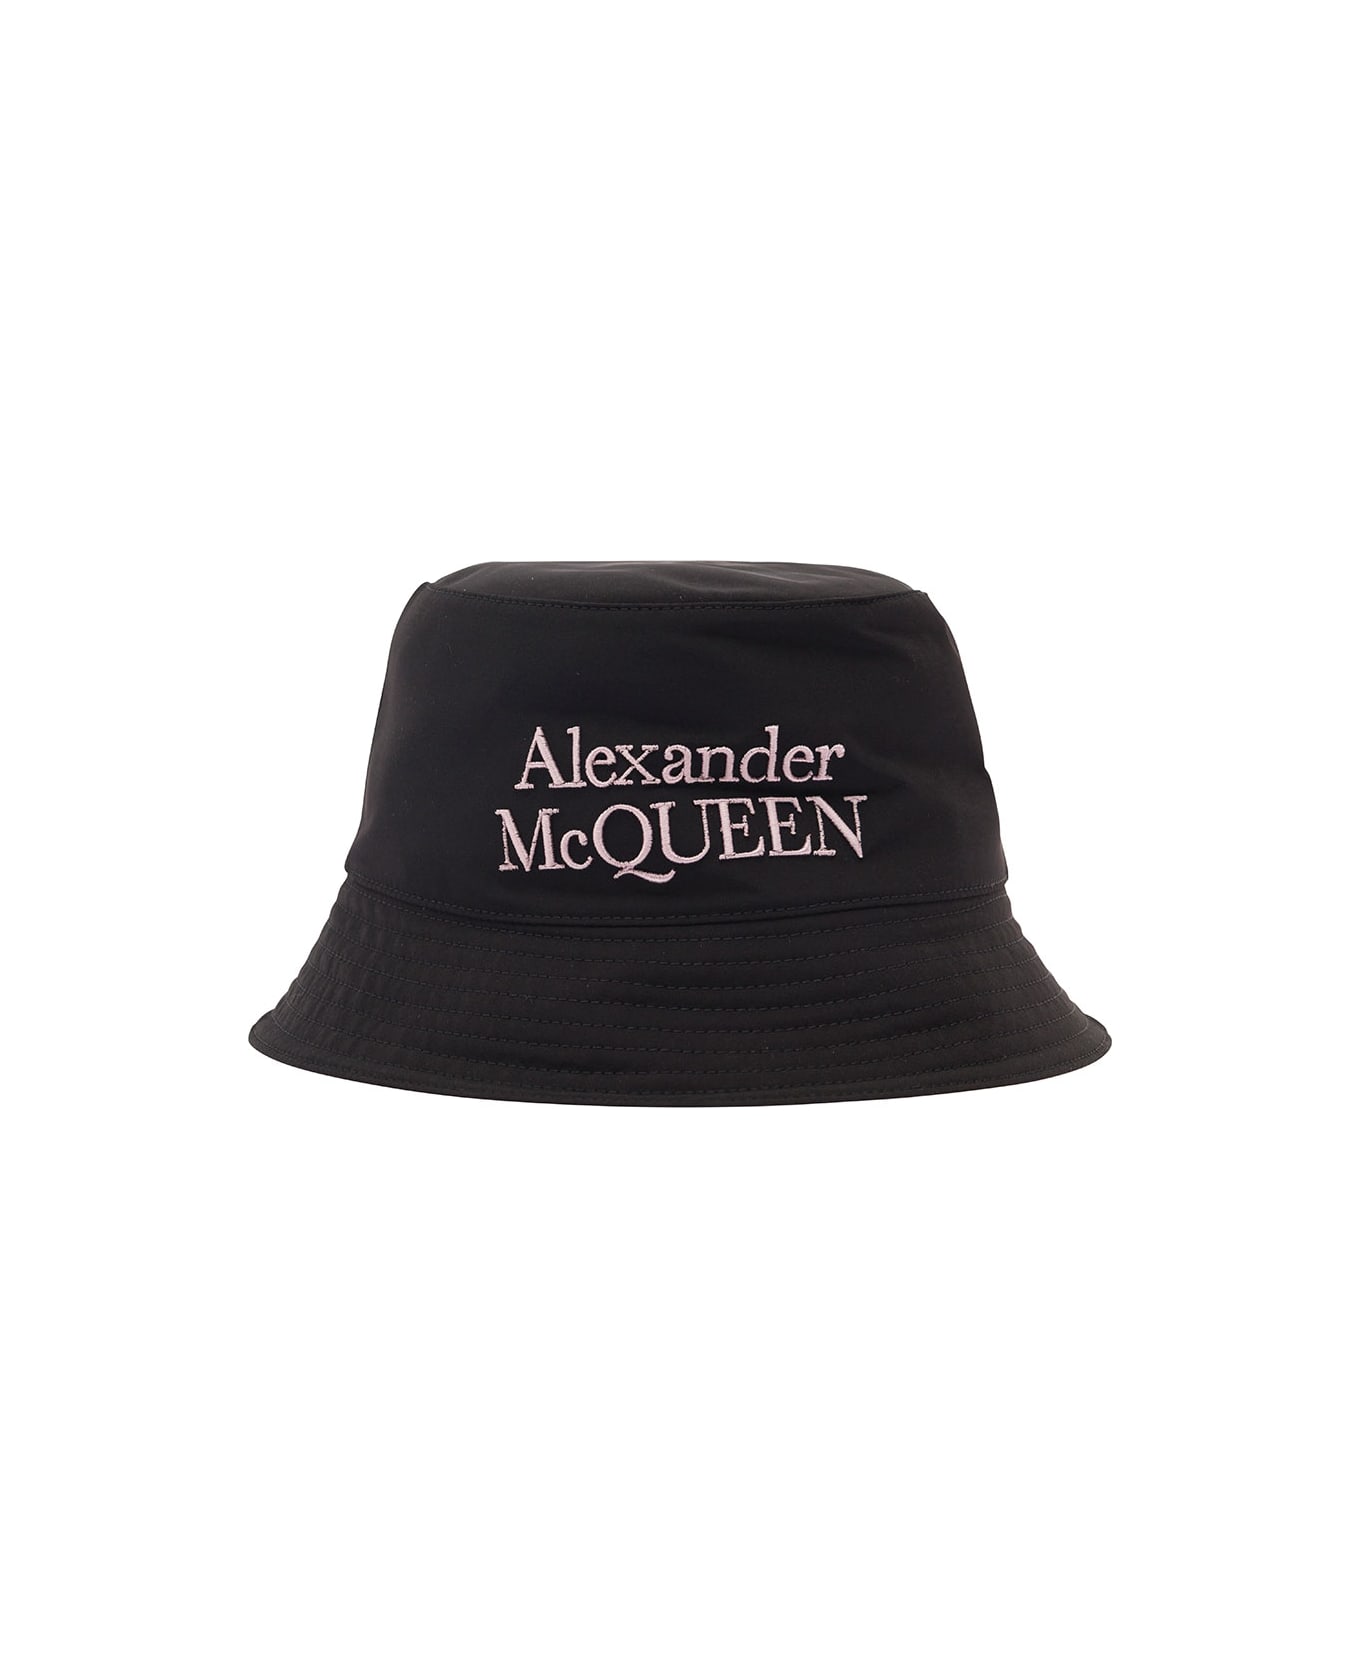 Alexander McQueen Black And White Reversible Bucket Hat With Logo Embroidery In Polyamide Man - Black 帽子